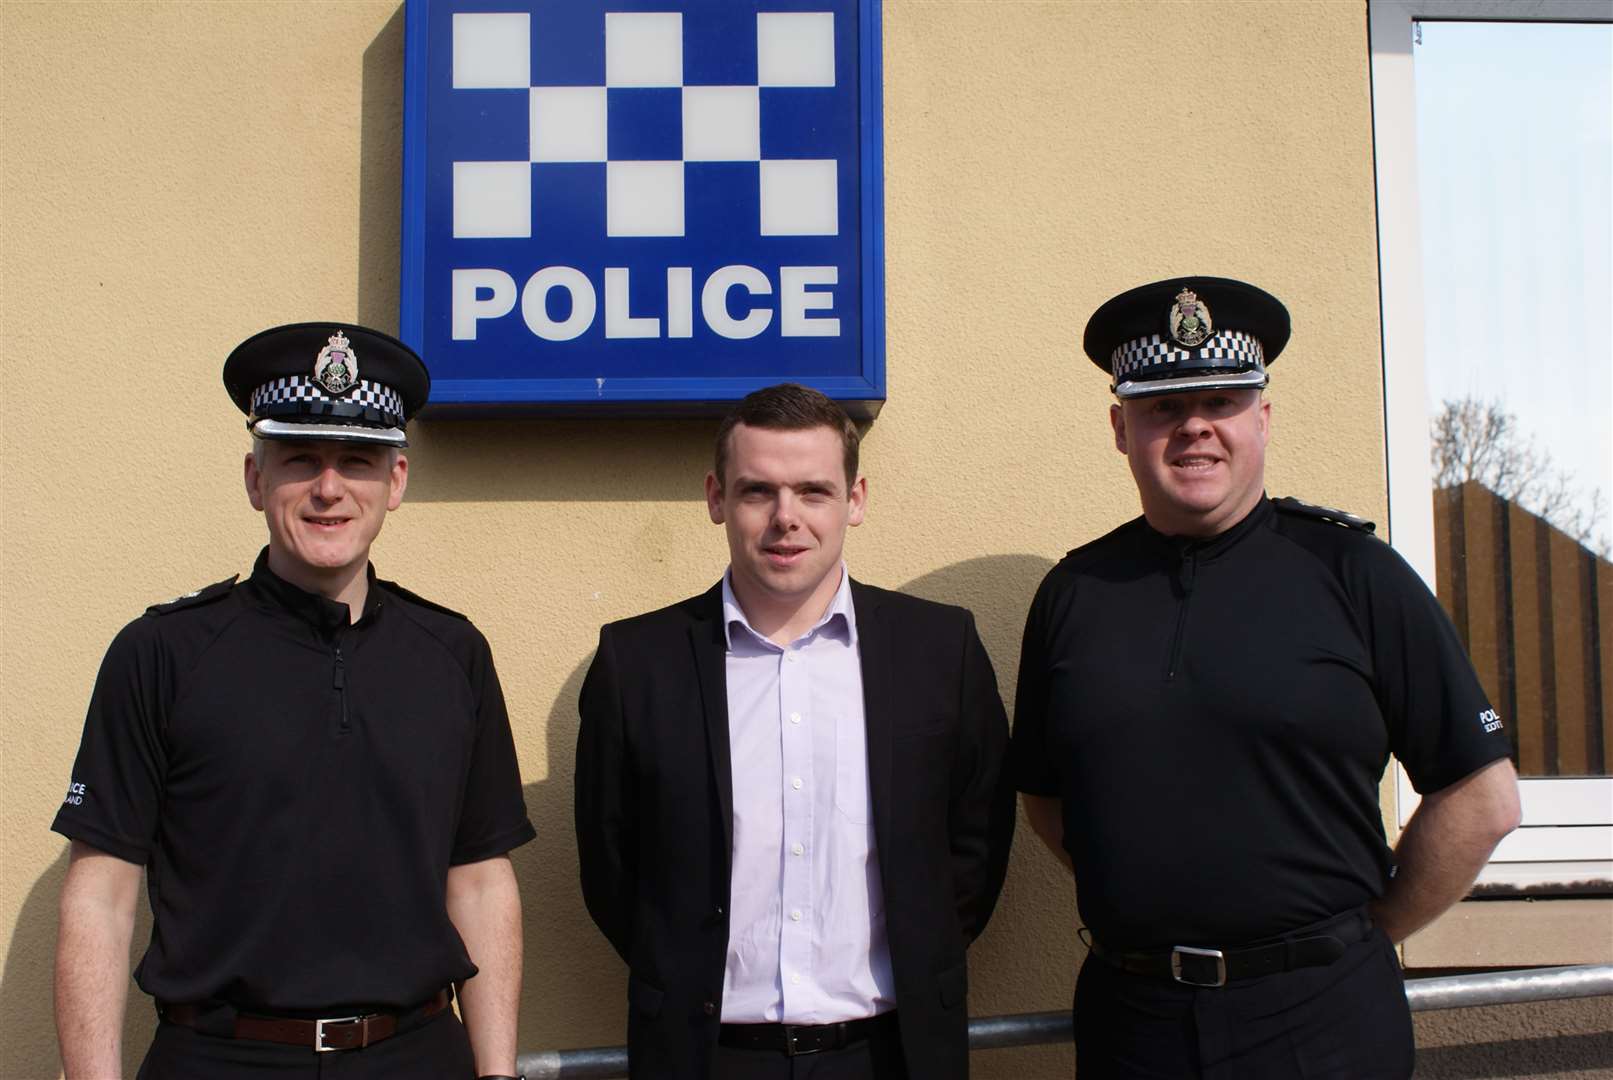 Attached is a photo with (From L to R) Inspector Norman Stevenson, Douglas Ross MP and Chief Inspector Murray Main.